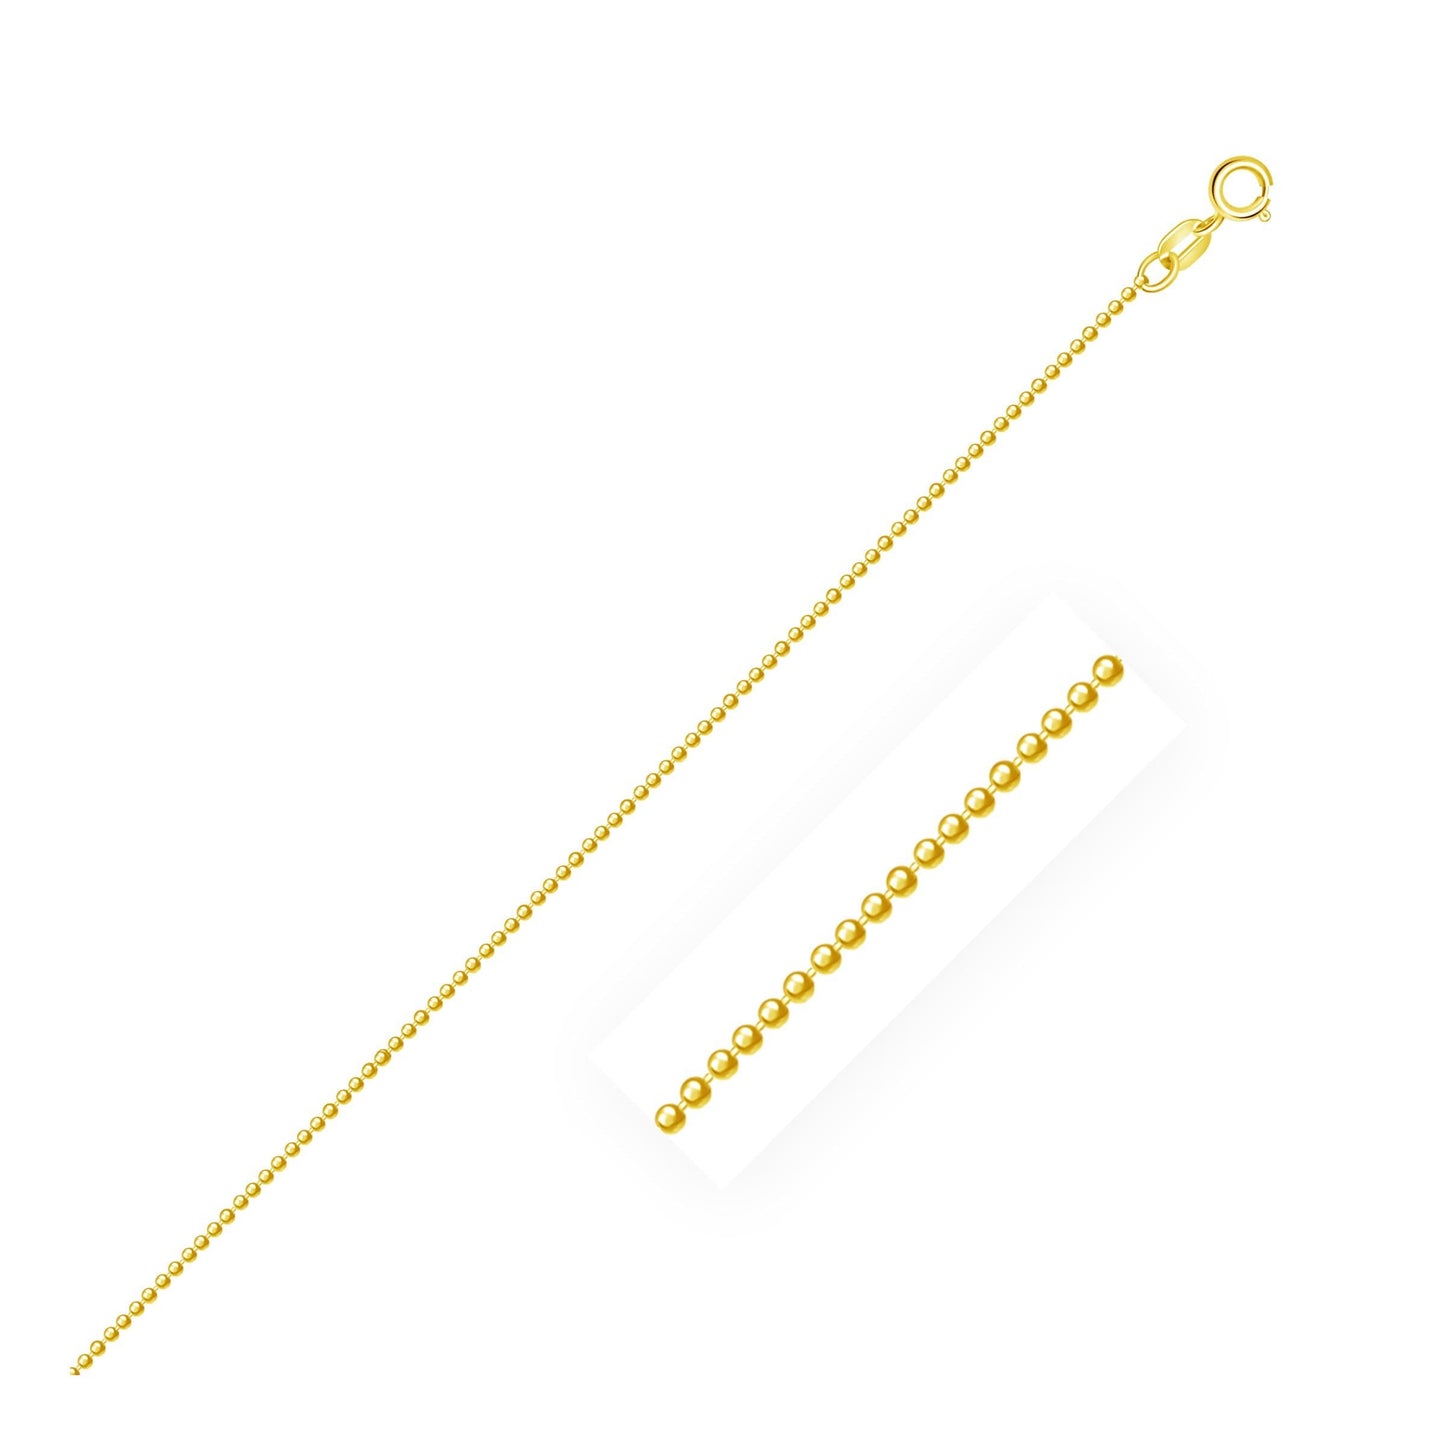 14k Yellow Gold Bead Chain in 1.0 mm